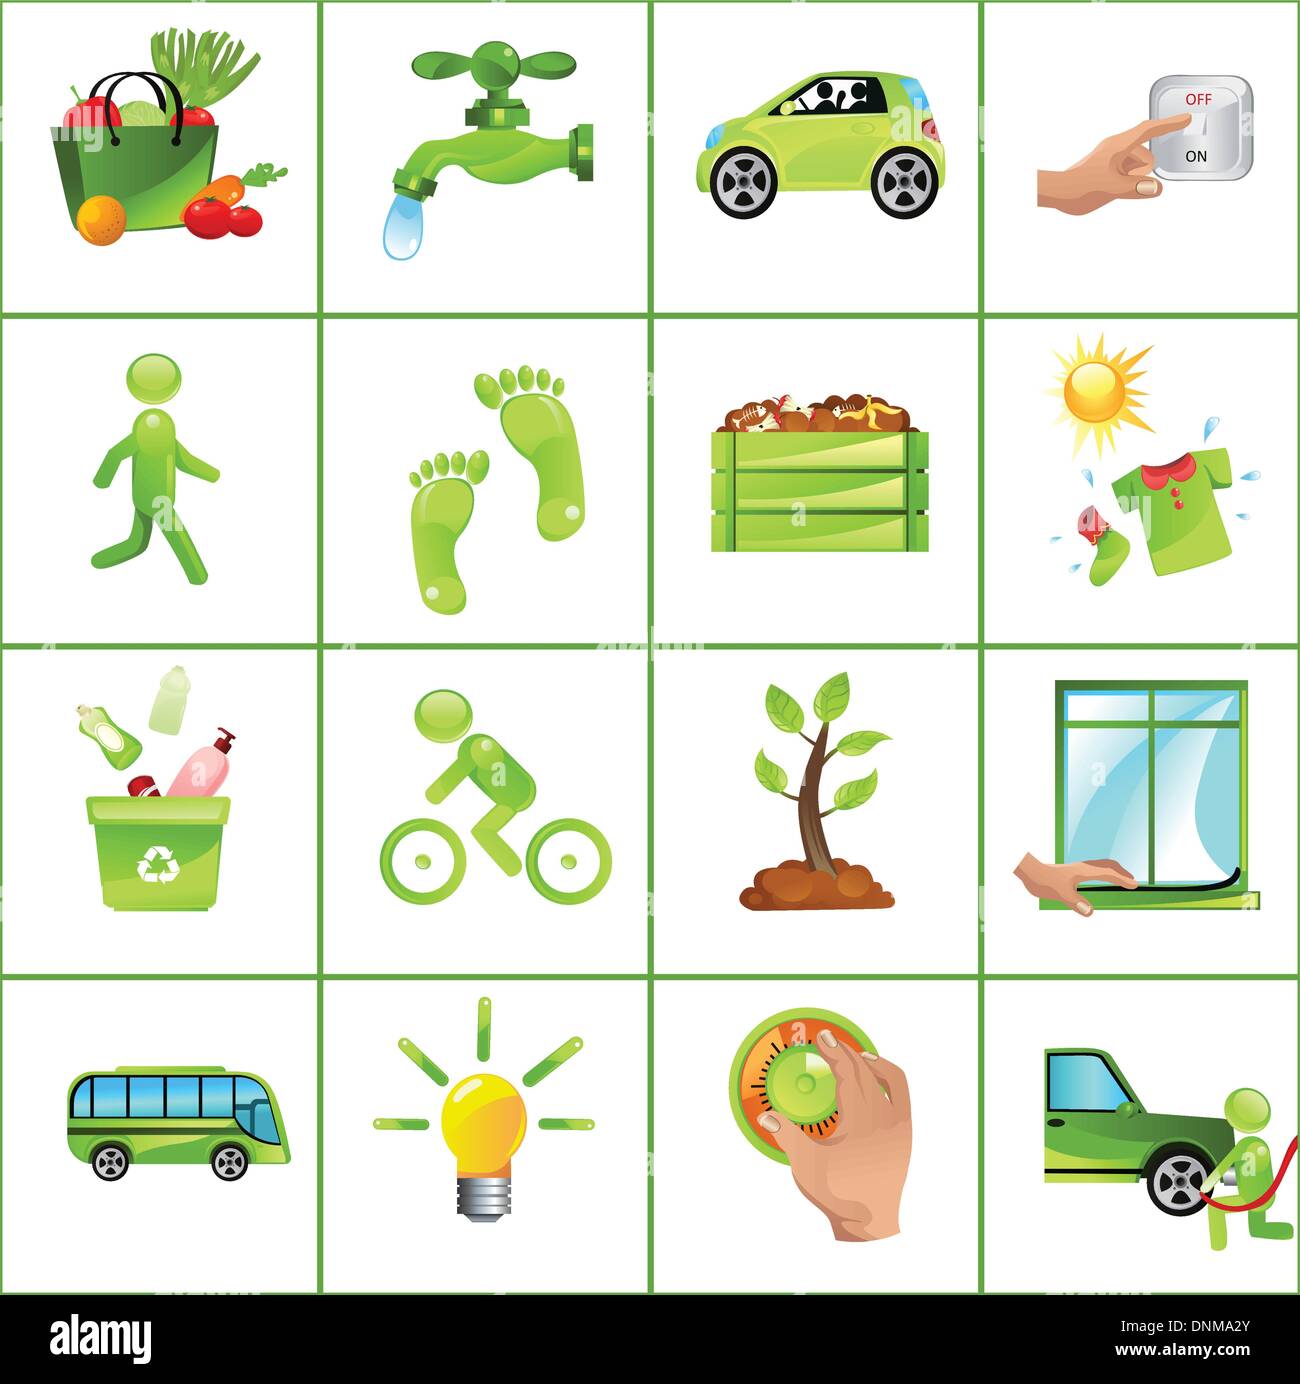 Vector illustration of GO GREEN concept: buy local produce, fix leaky faucets, carpool, turn off light, walk more, compost, dry Stock Vector